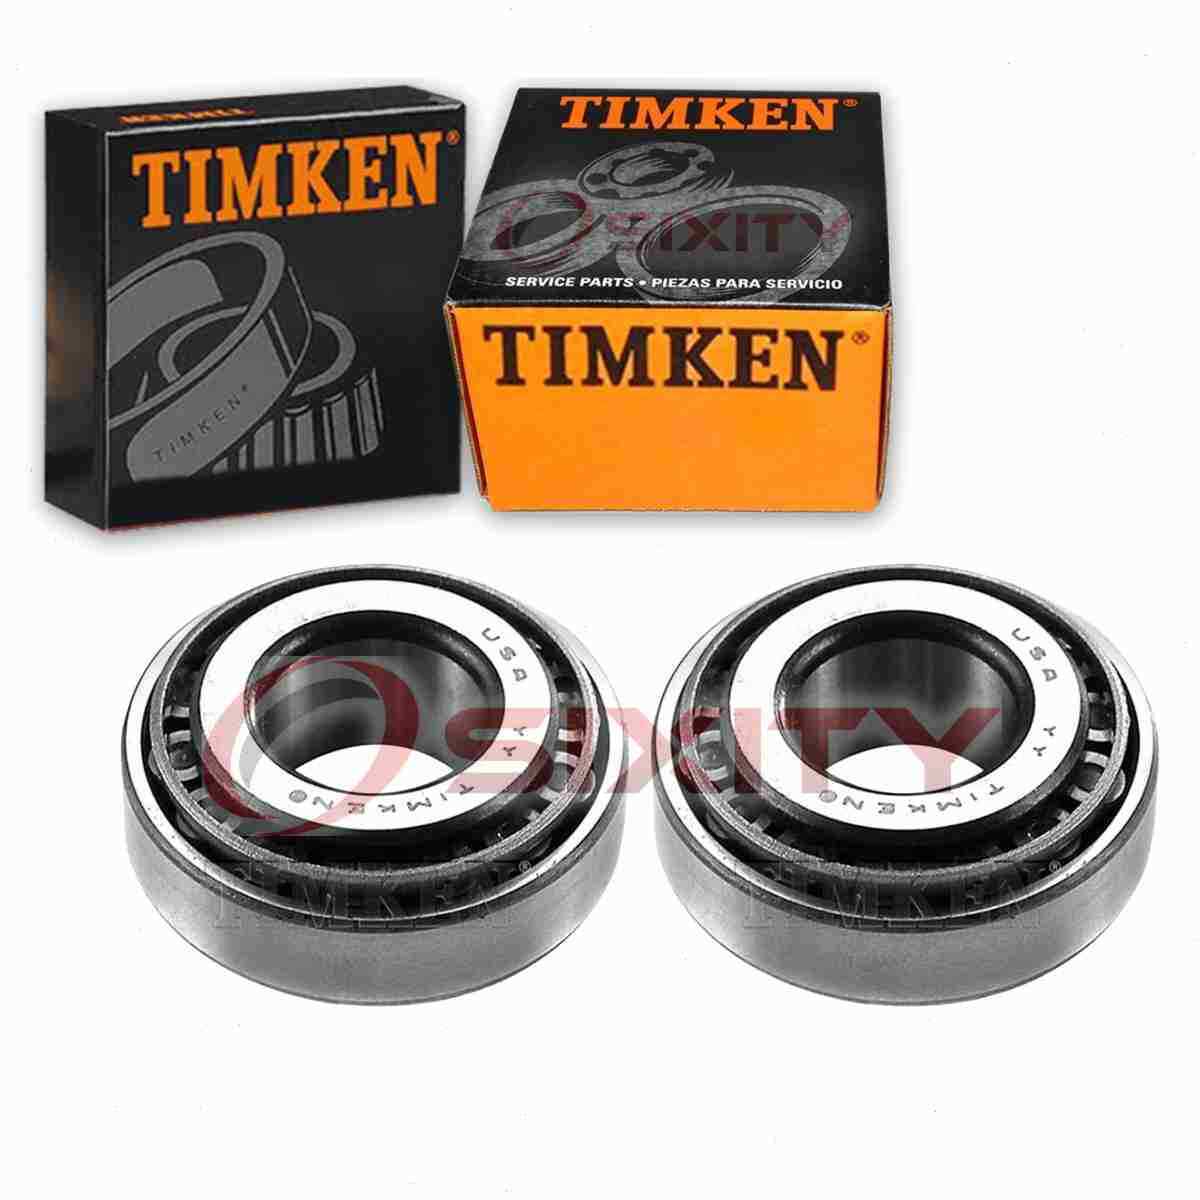 2 pc Timken Front Outer Wheel Bearing and Race Sets for 1975-1978 Oldsmobile fz